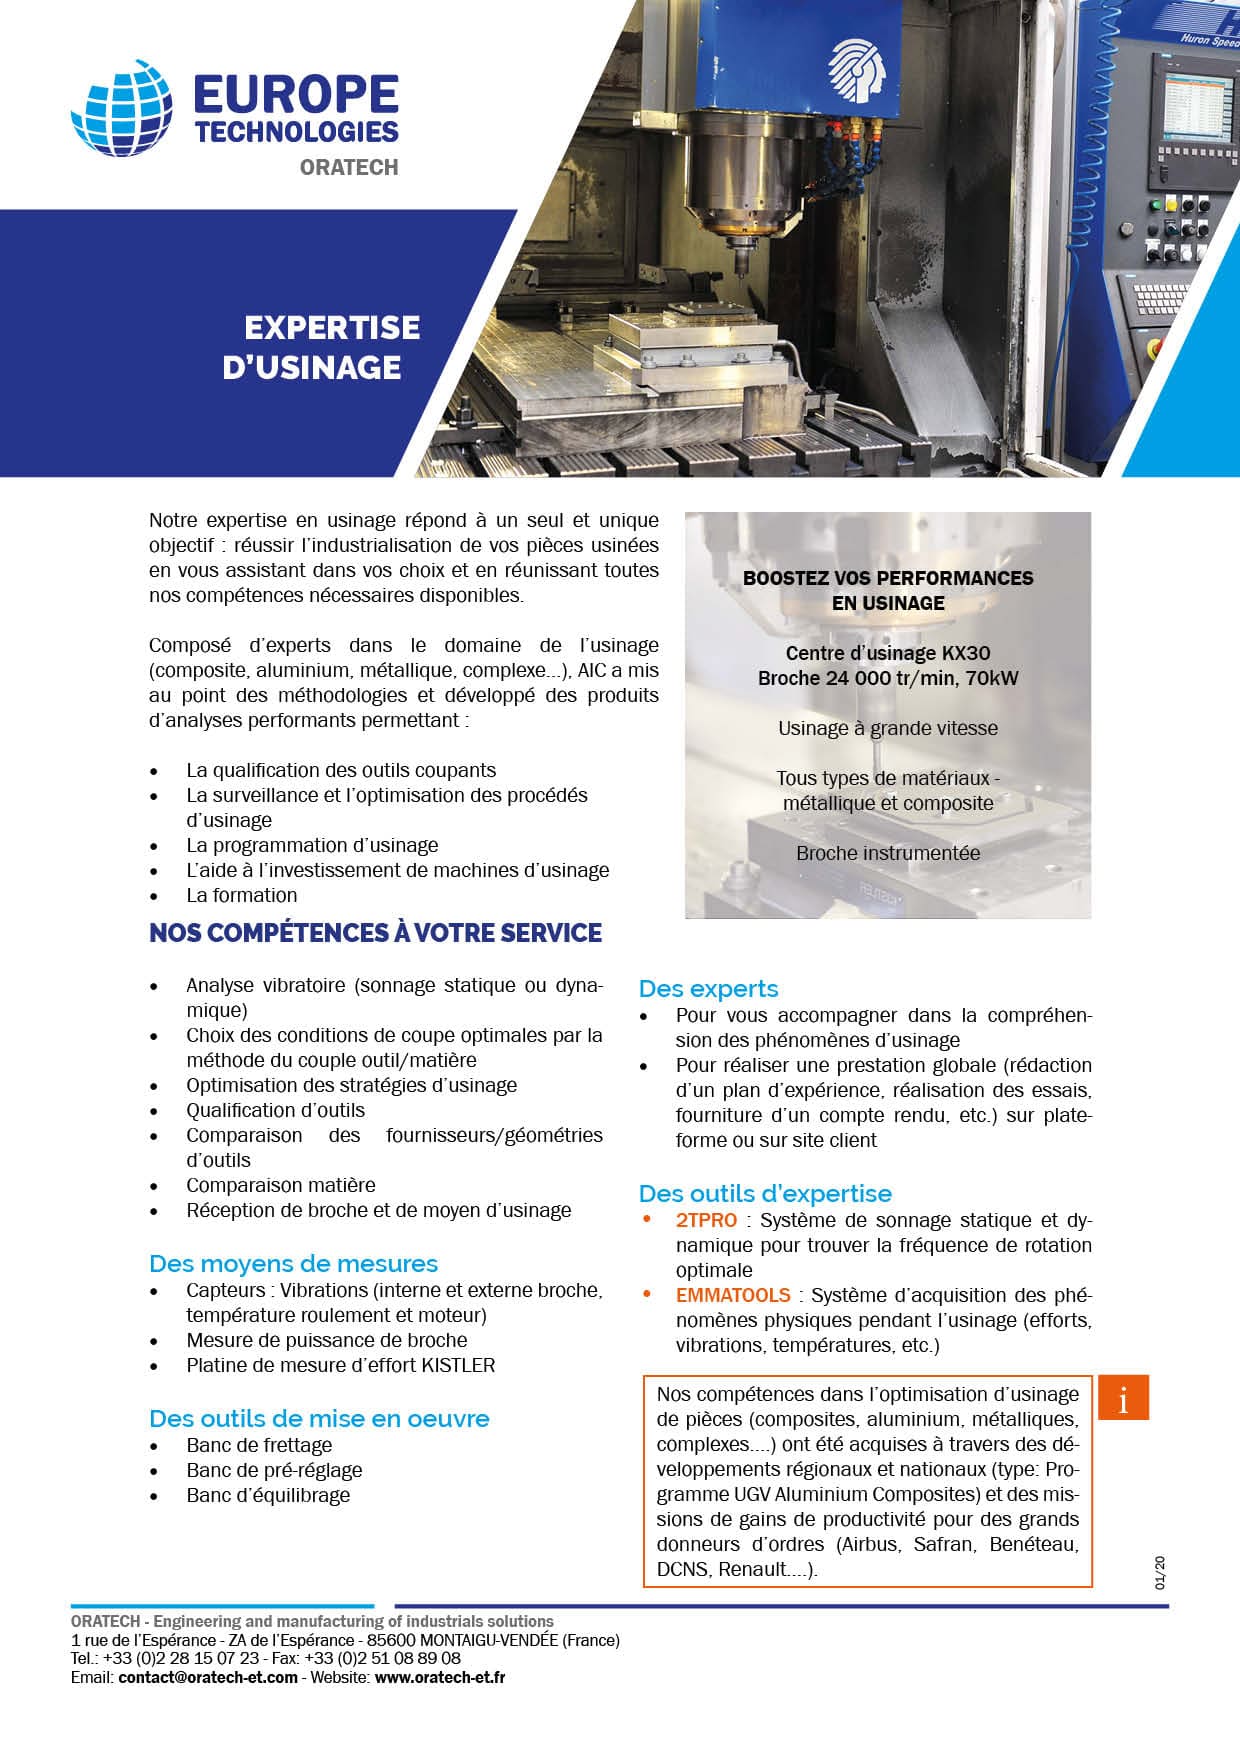 Expertise d'usinage - ORATECH